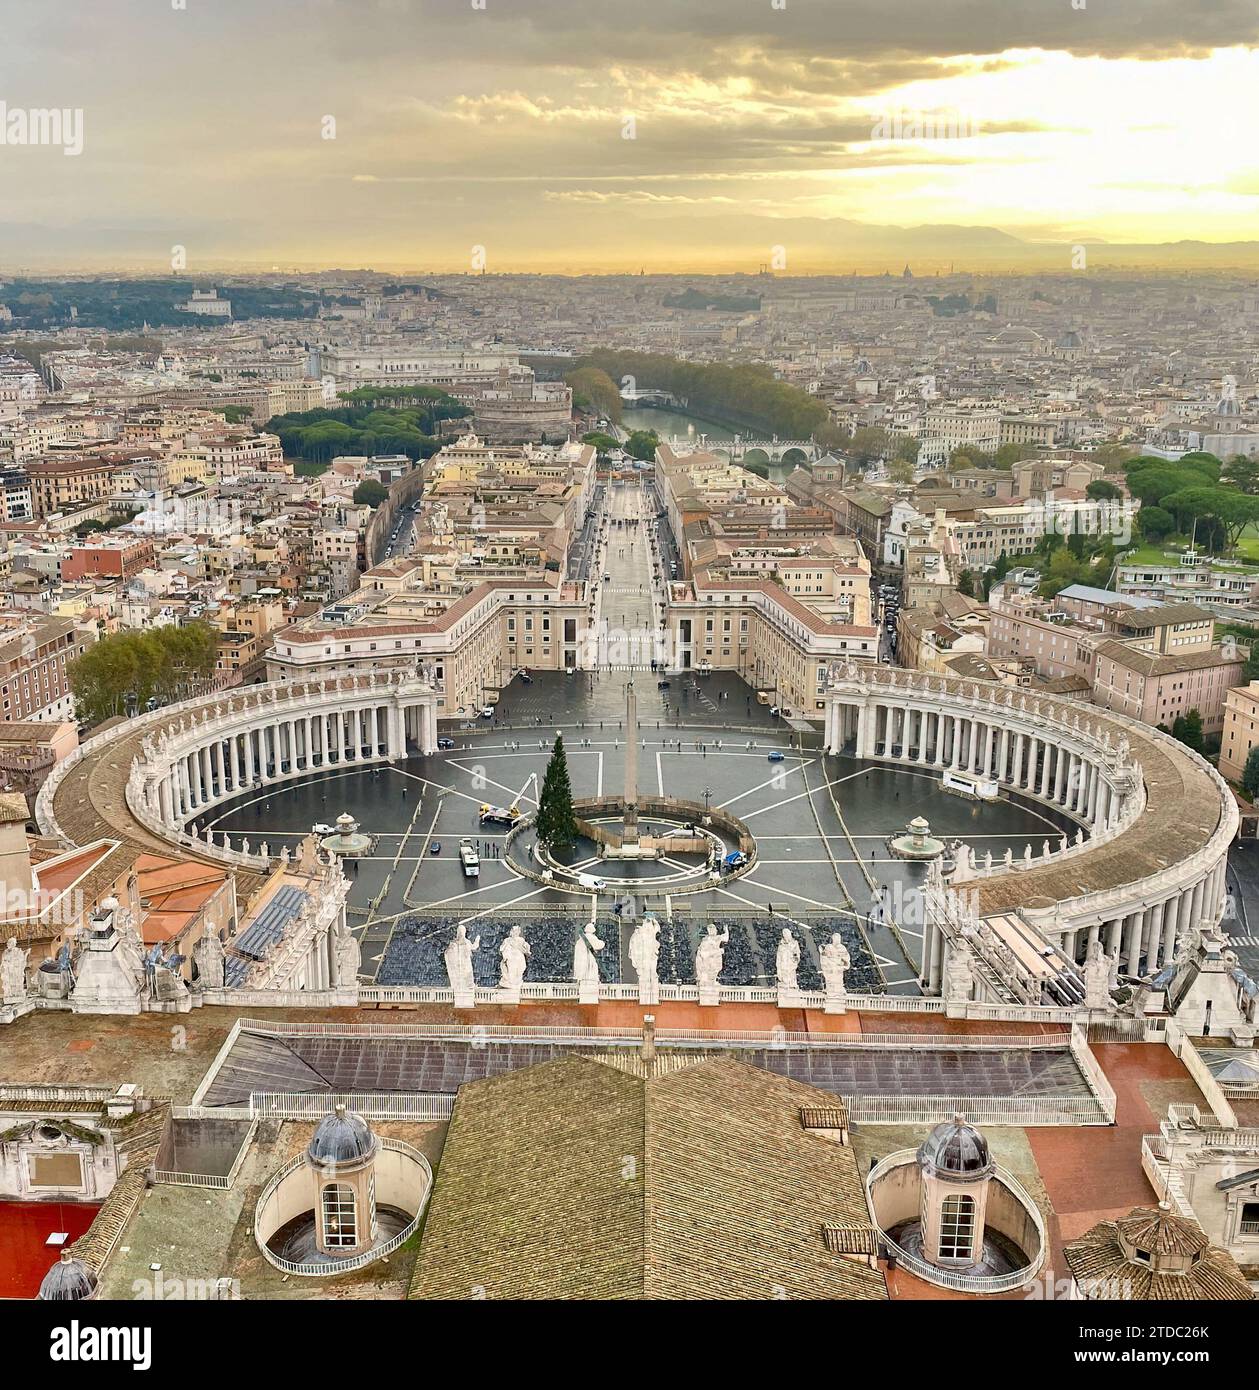 St Peters square in Vatican and view of Vatican City from above the basilica at sunrise Stock Photo